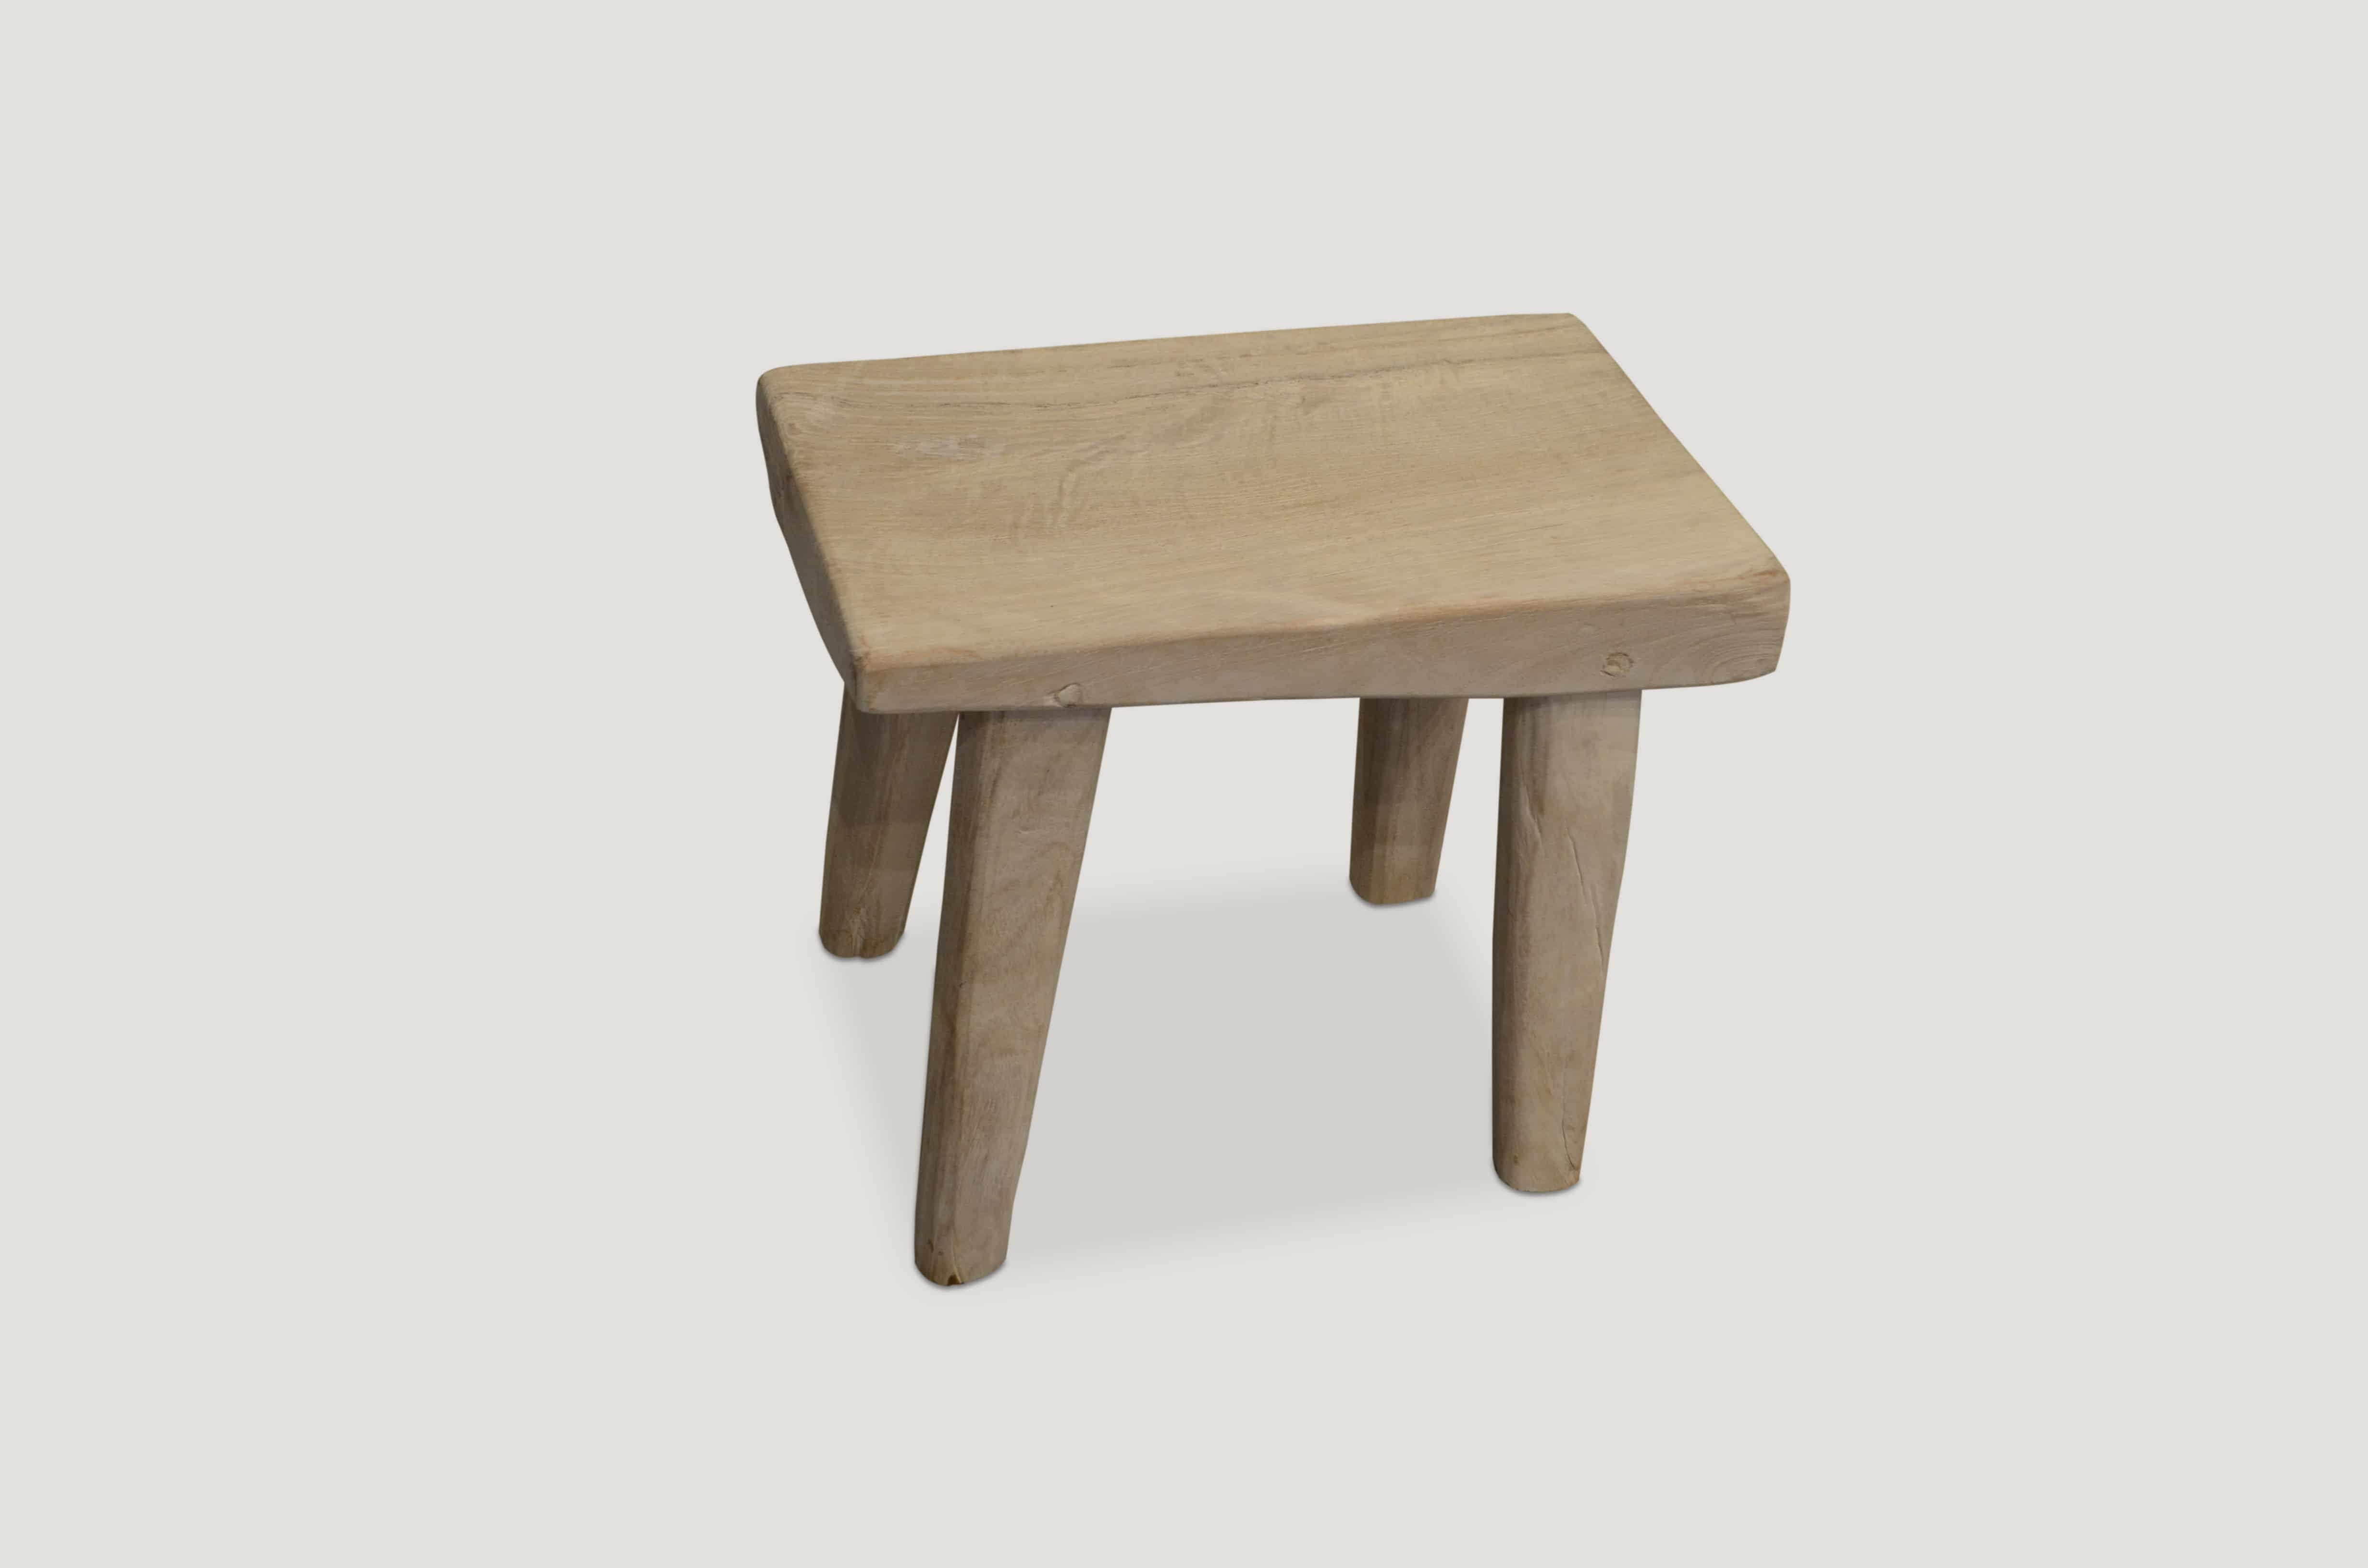 ST. BARTS SIDE TABLE OR STOOL